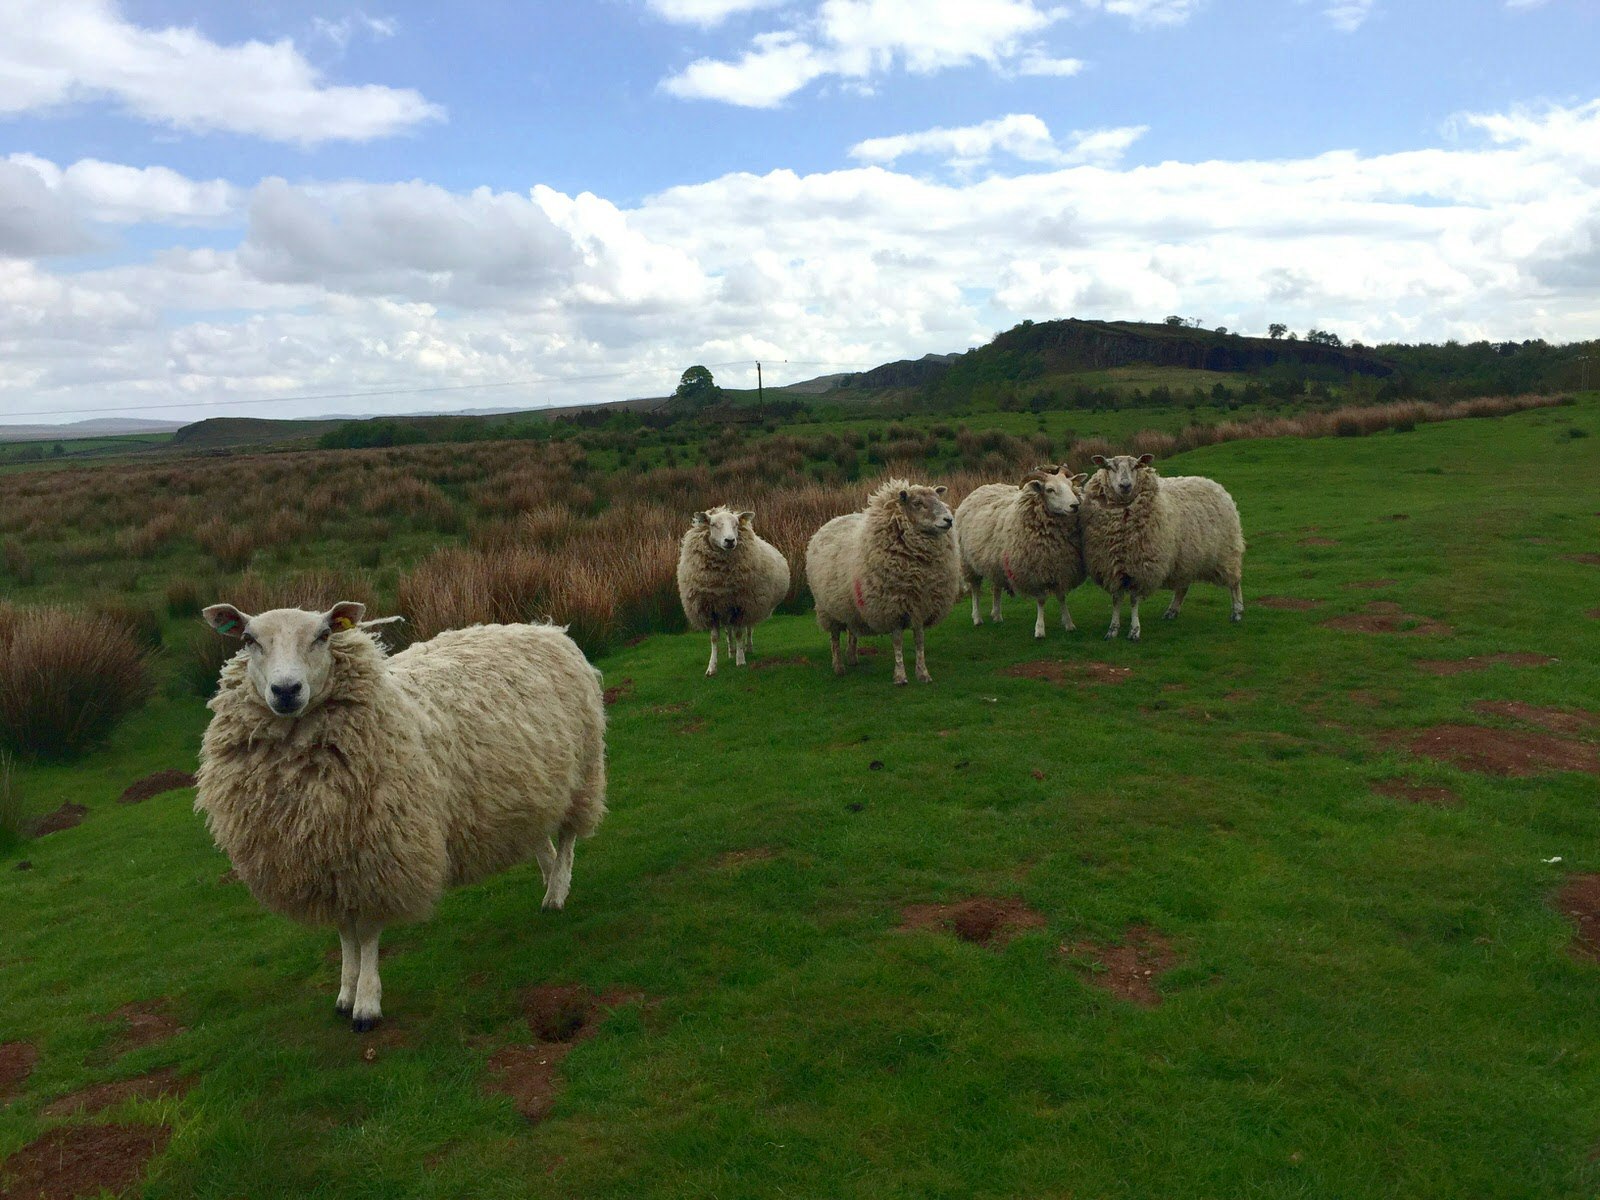 A small herd of sheep look at the camera on a green hillside